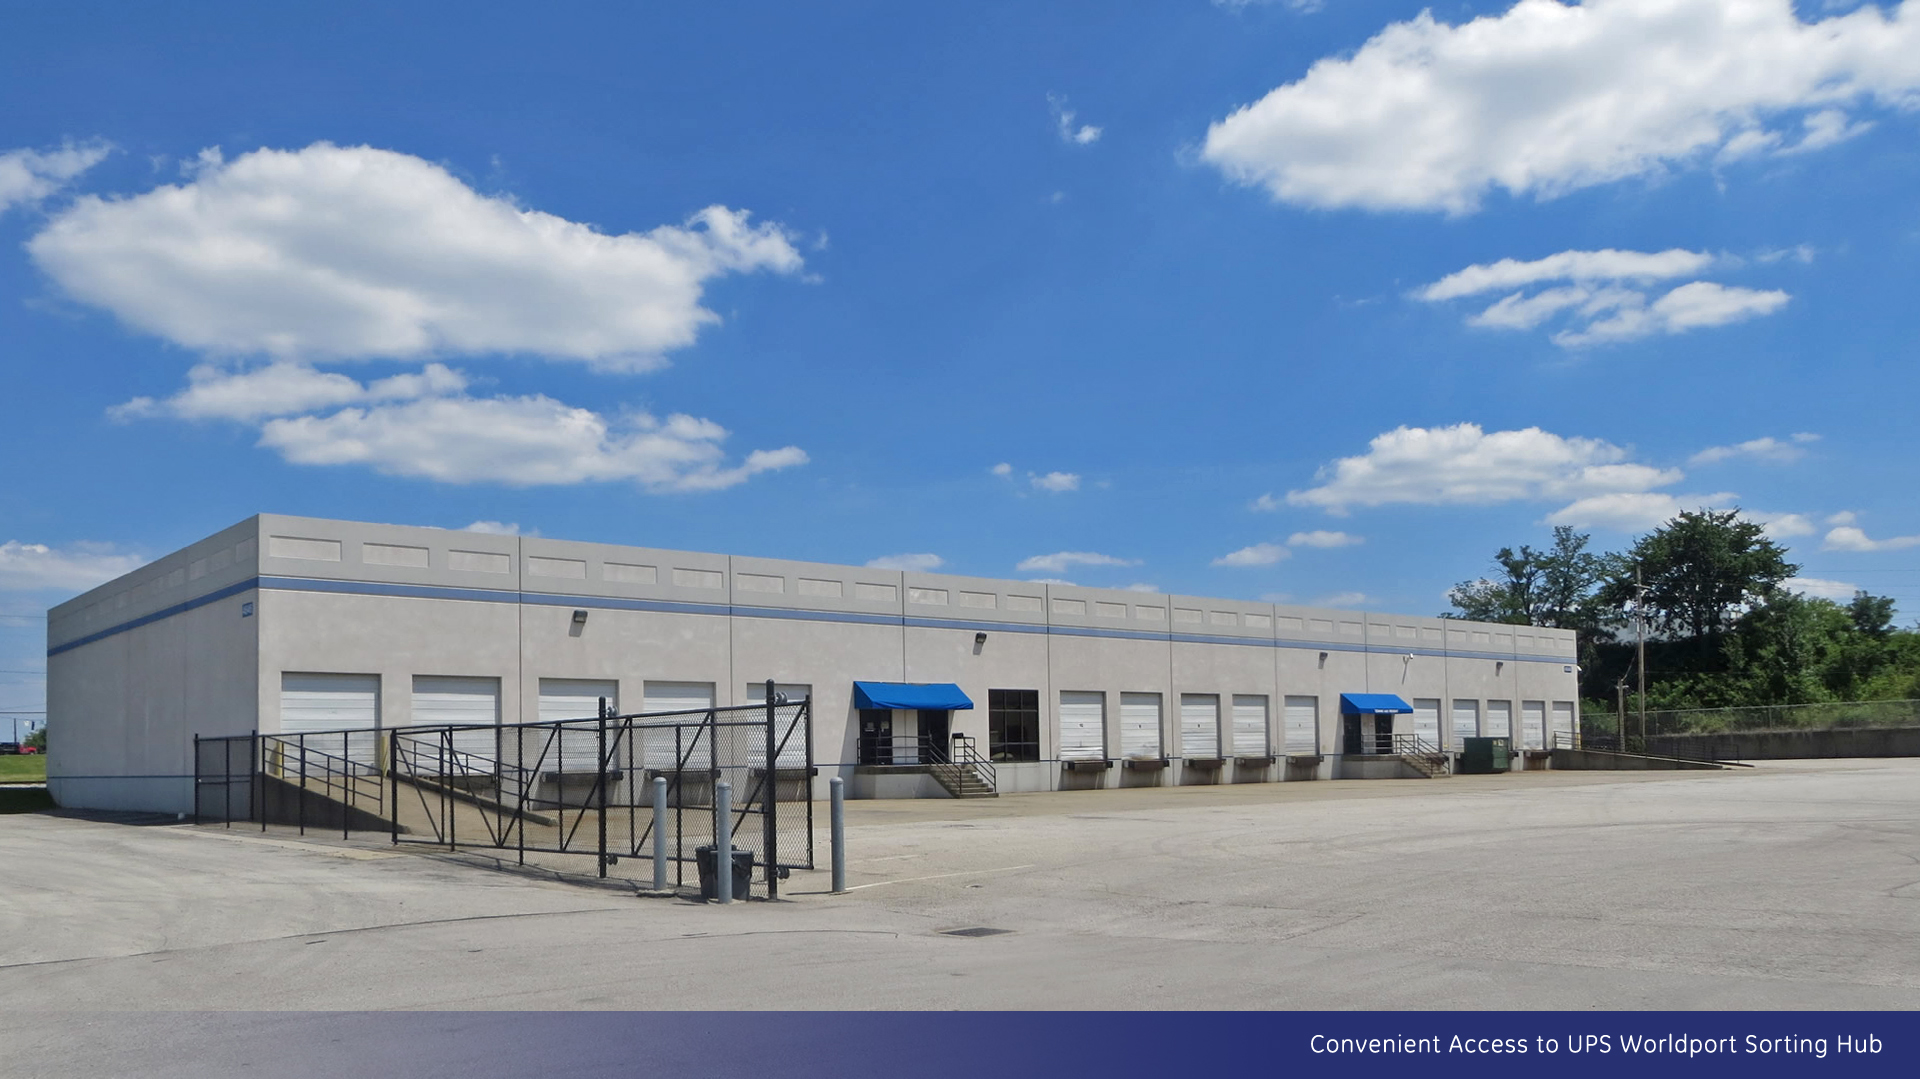 Commercial Property for Lease near airport